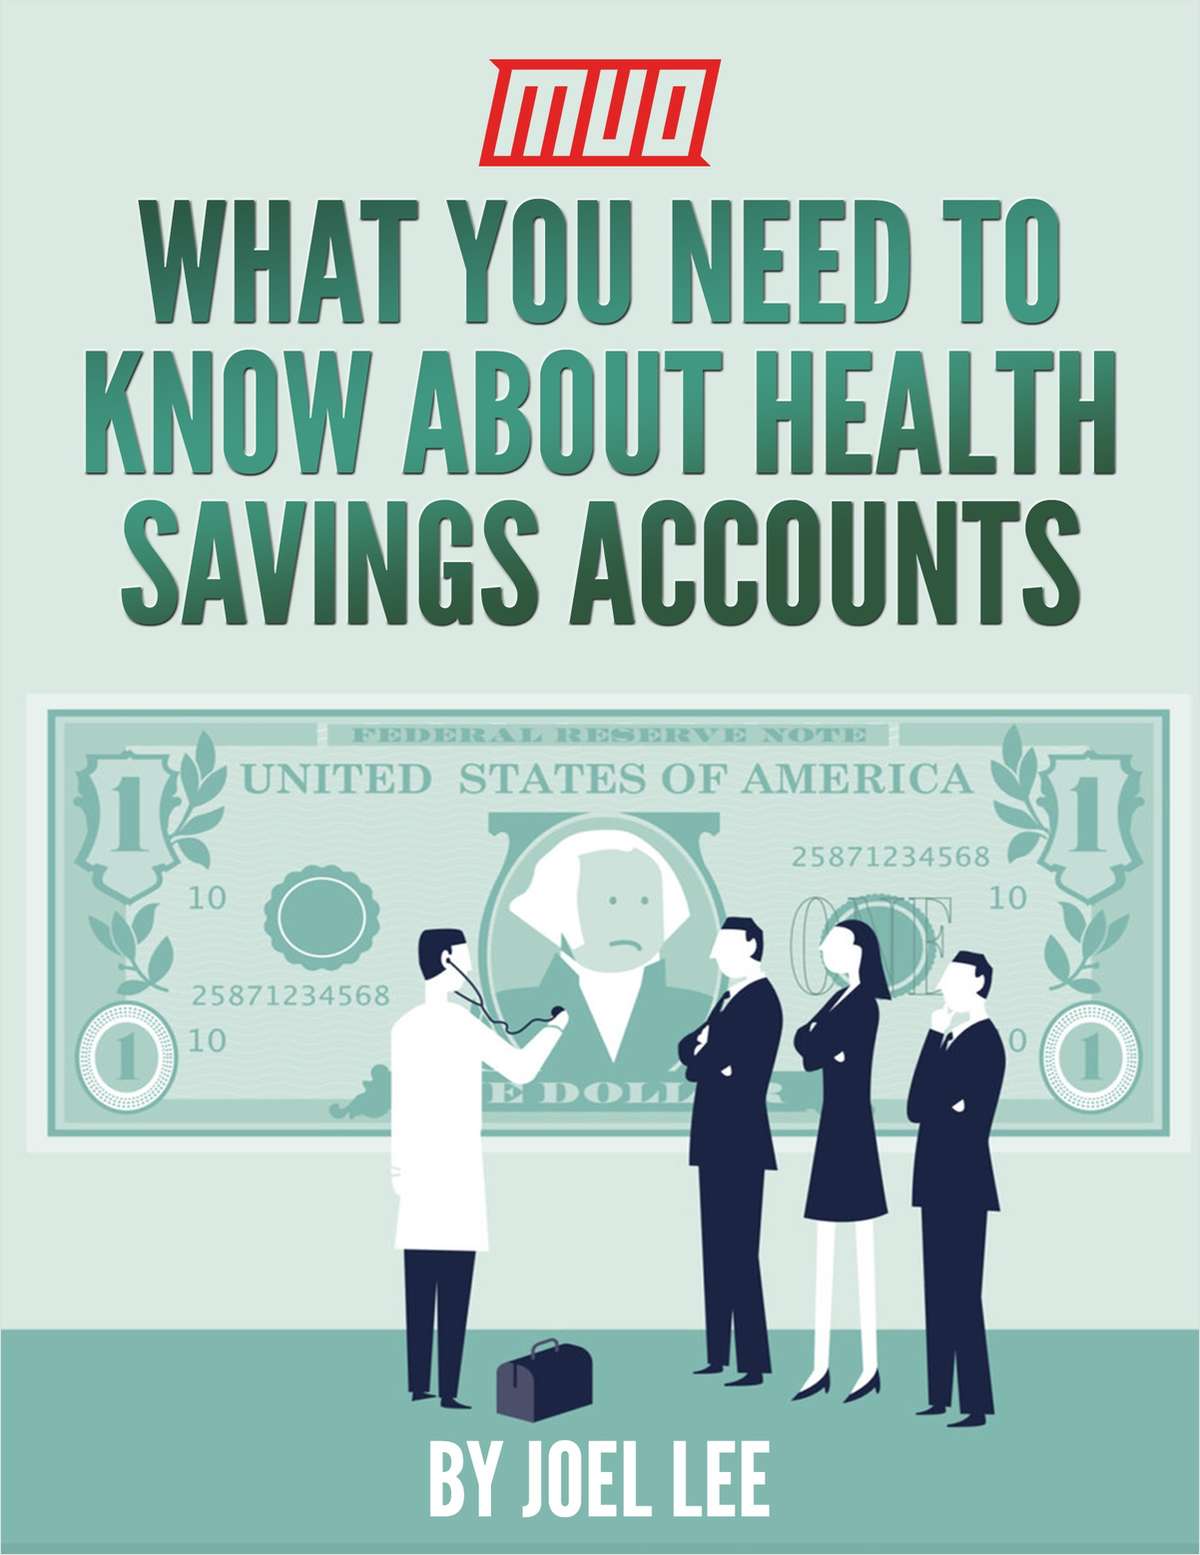 What You Need to Know About Health Savings Accounts